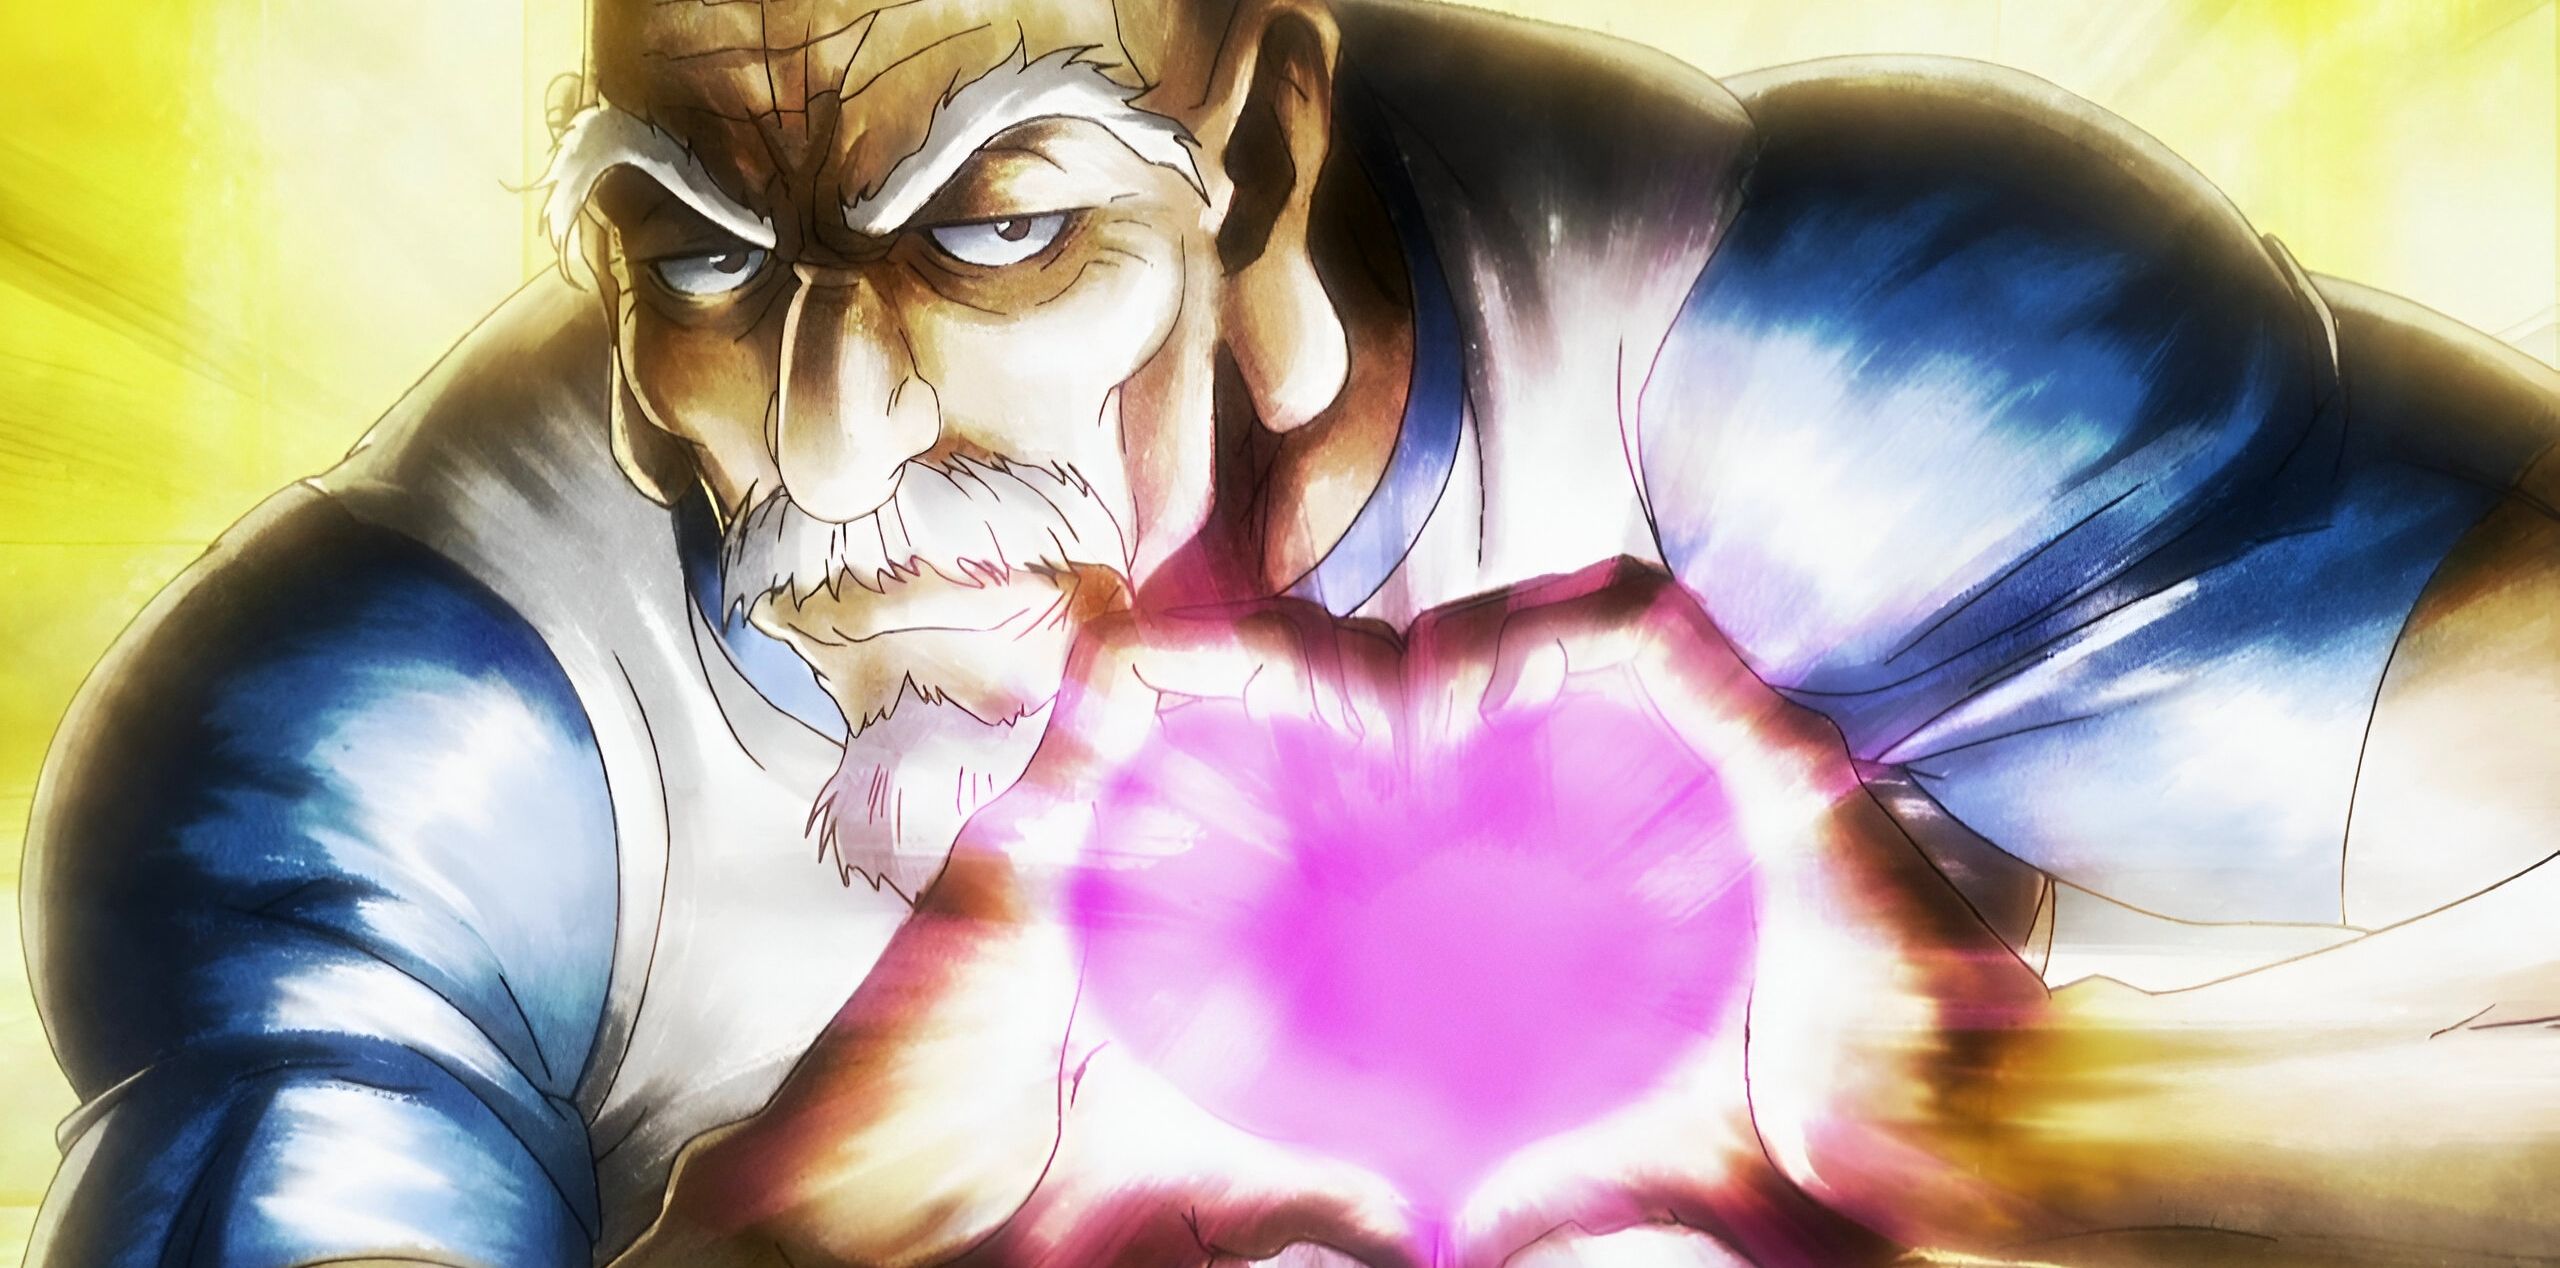 Chairman Netero launches Meruem into a pillar and forms a heart to thank him for their fight in Hunter x Hunter.